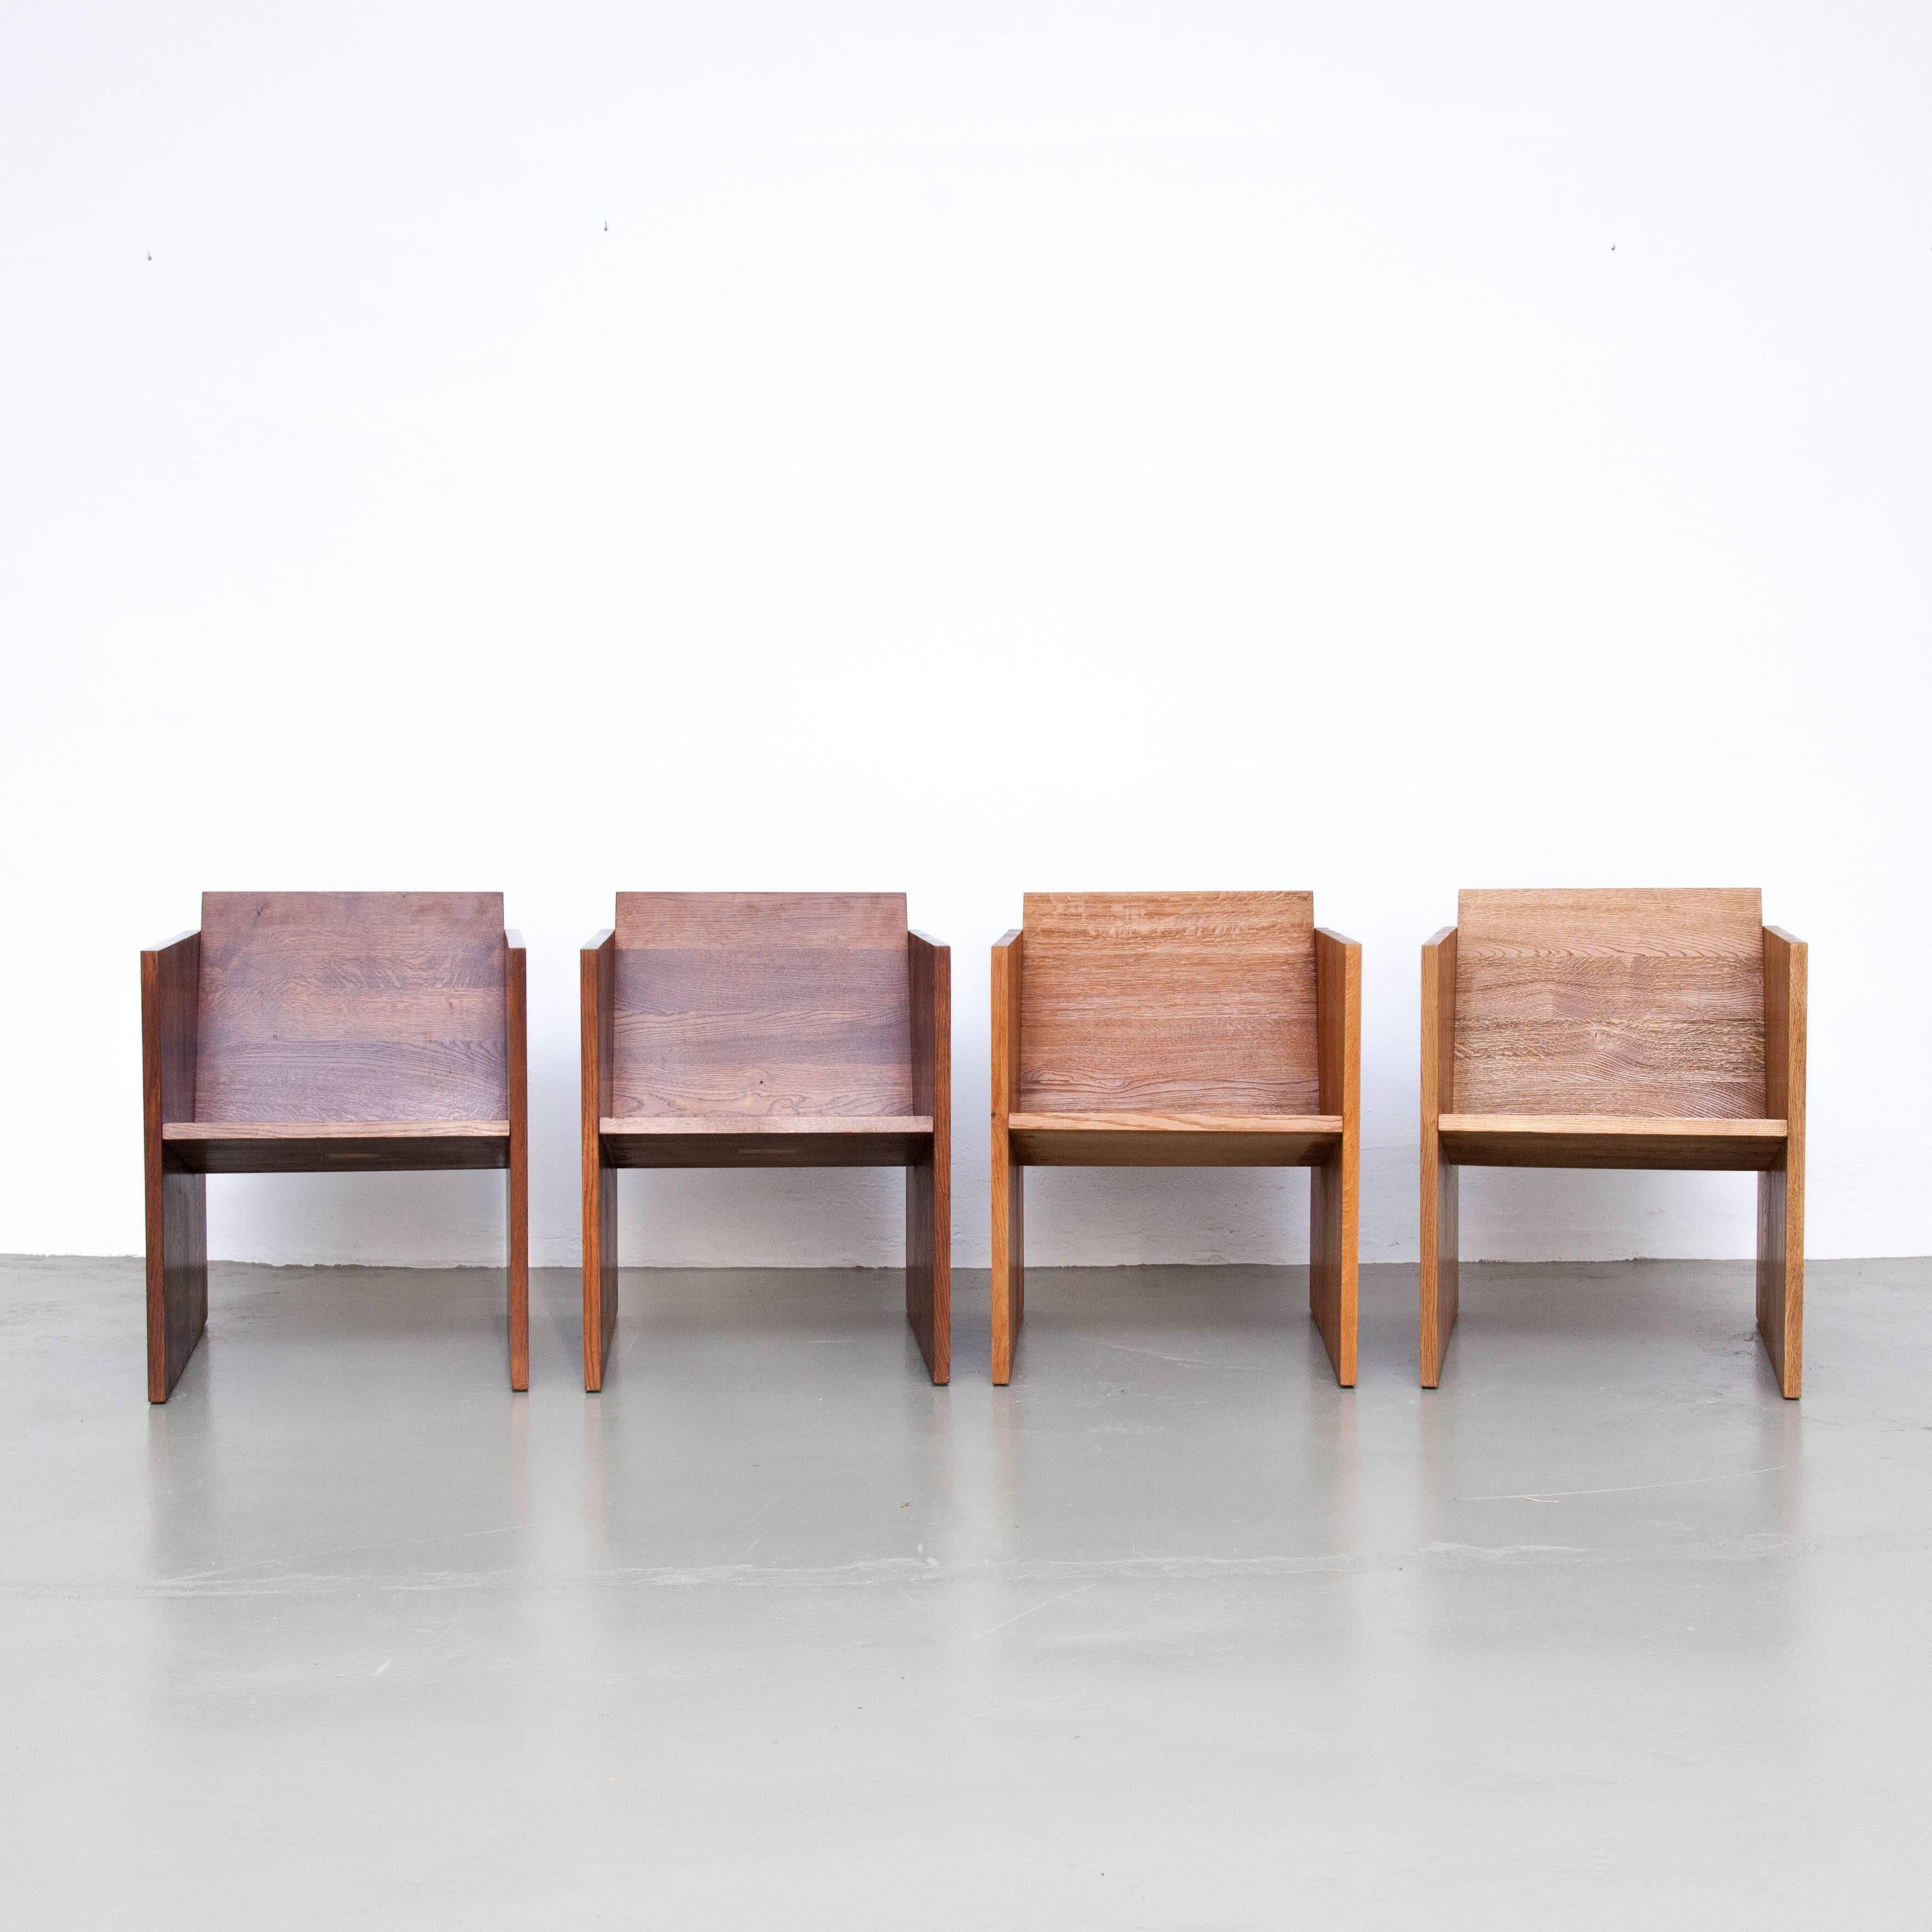 Set of four WSS1 numbers 6 / 12 / 14 / 15 easy chairs designed by Jan Paul Folkers.

In good original condition.

Jan Paul Folkers, contemporary Dutch designer. In his pieces you can notice influences from De Stijl of Gerrit Rietveld to the